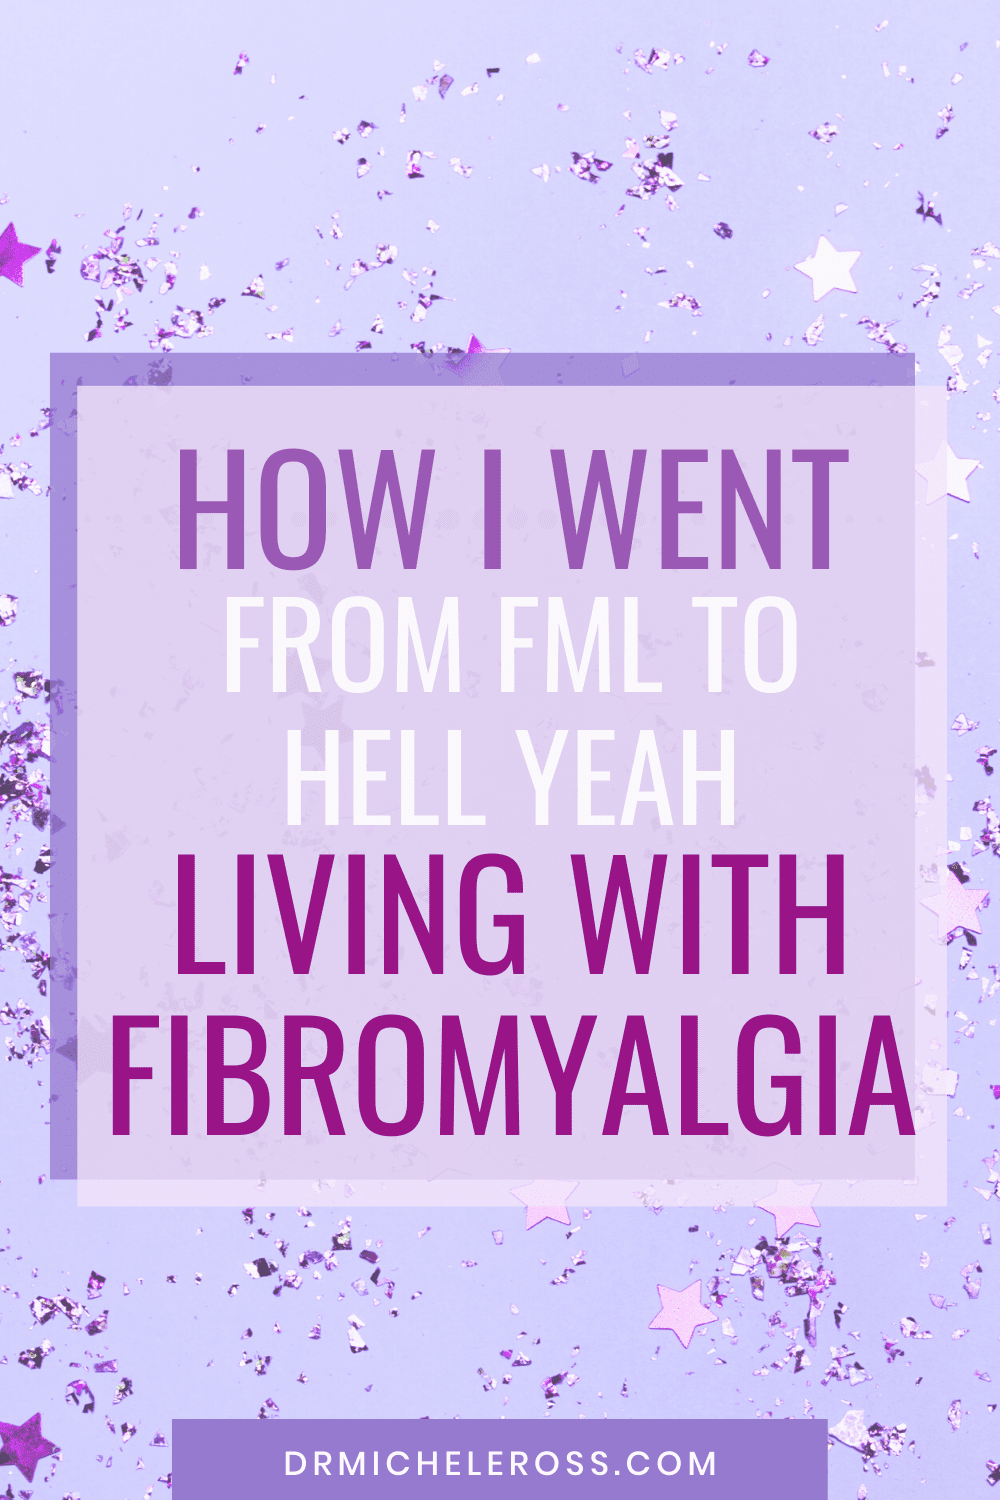 dr. michele ross shares her secrets to living pain free with fibromyalgia